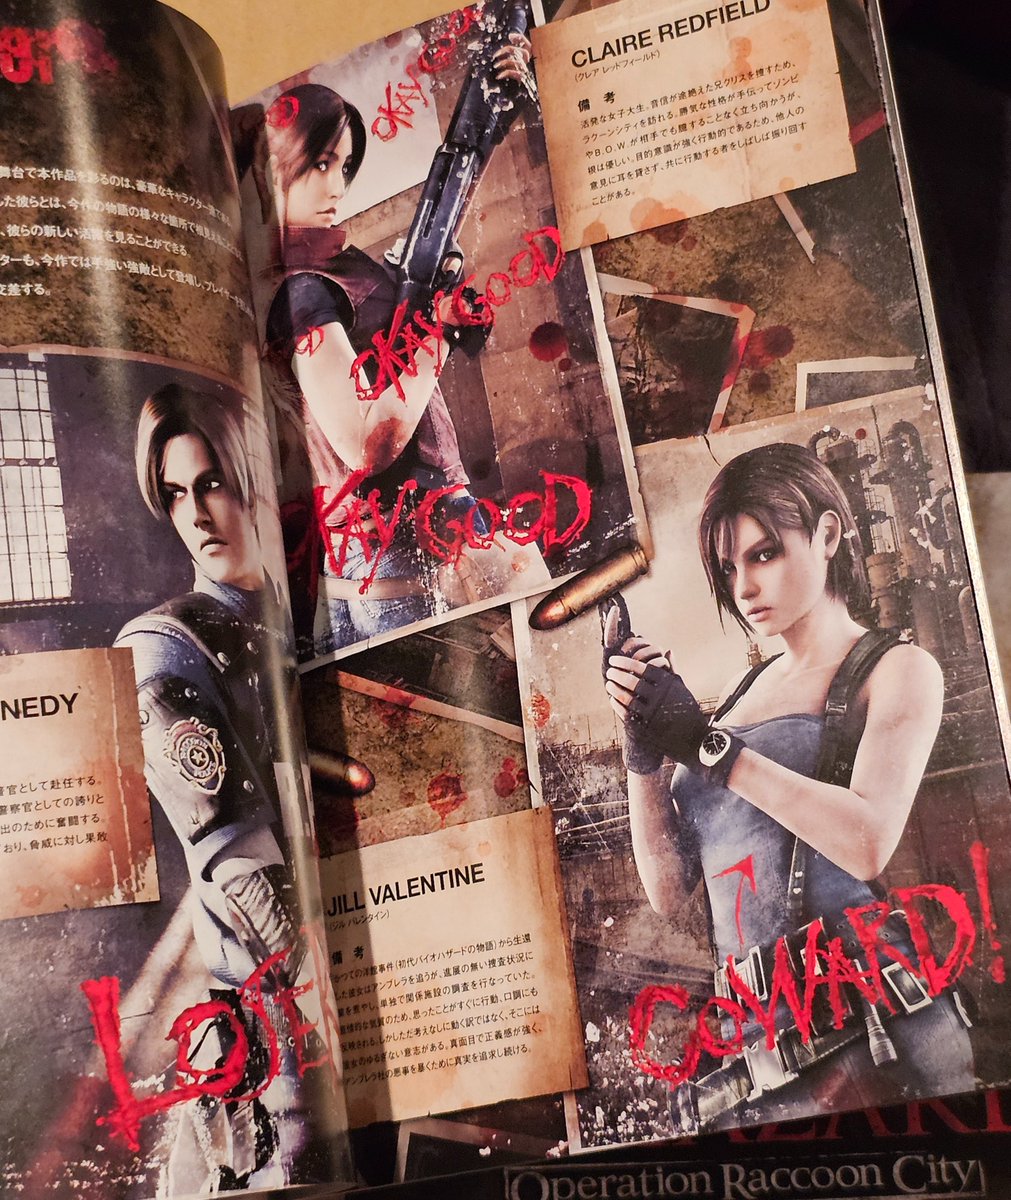 Biohazard Operation Raccoon City Concept Guide

Wolfpack has written little comments all over the character bios, all negative except for Claire (and each other).